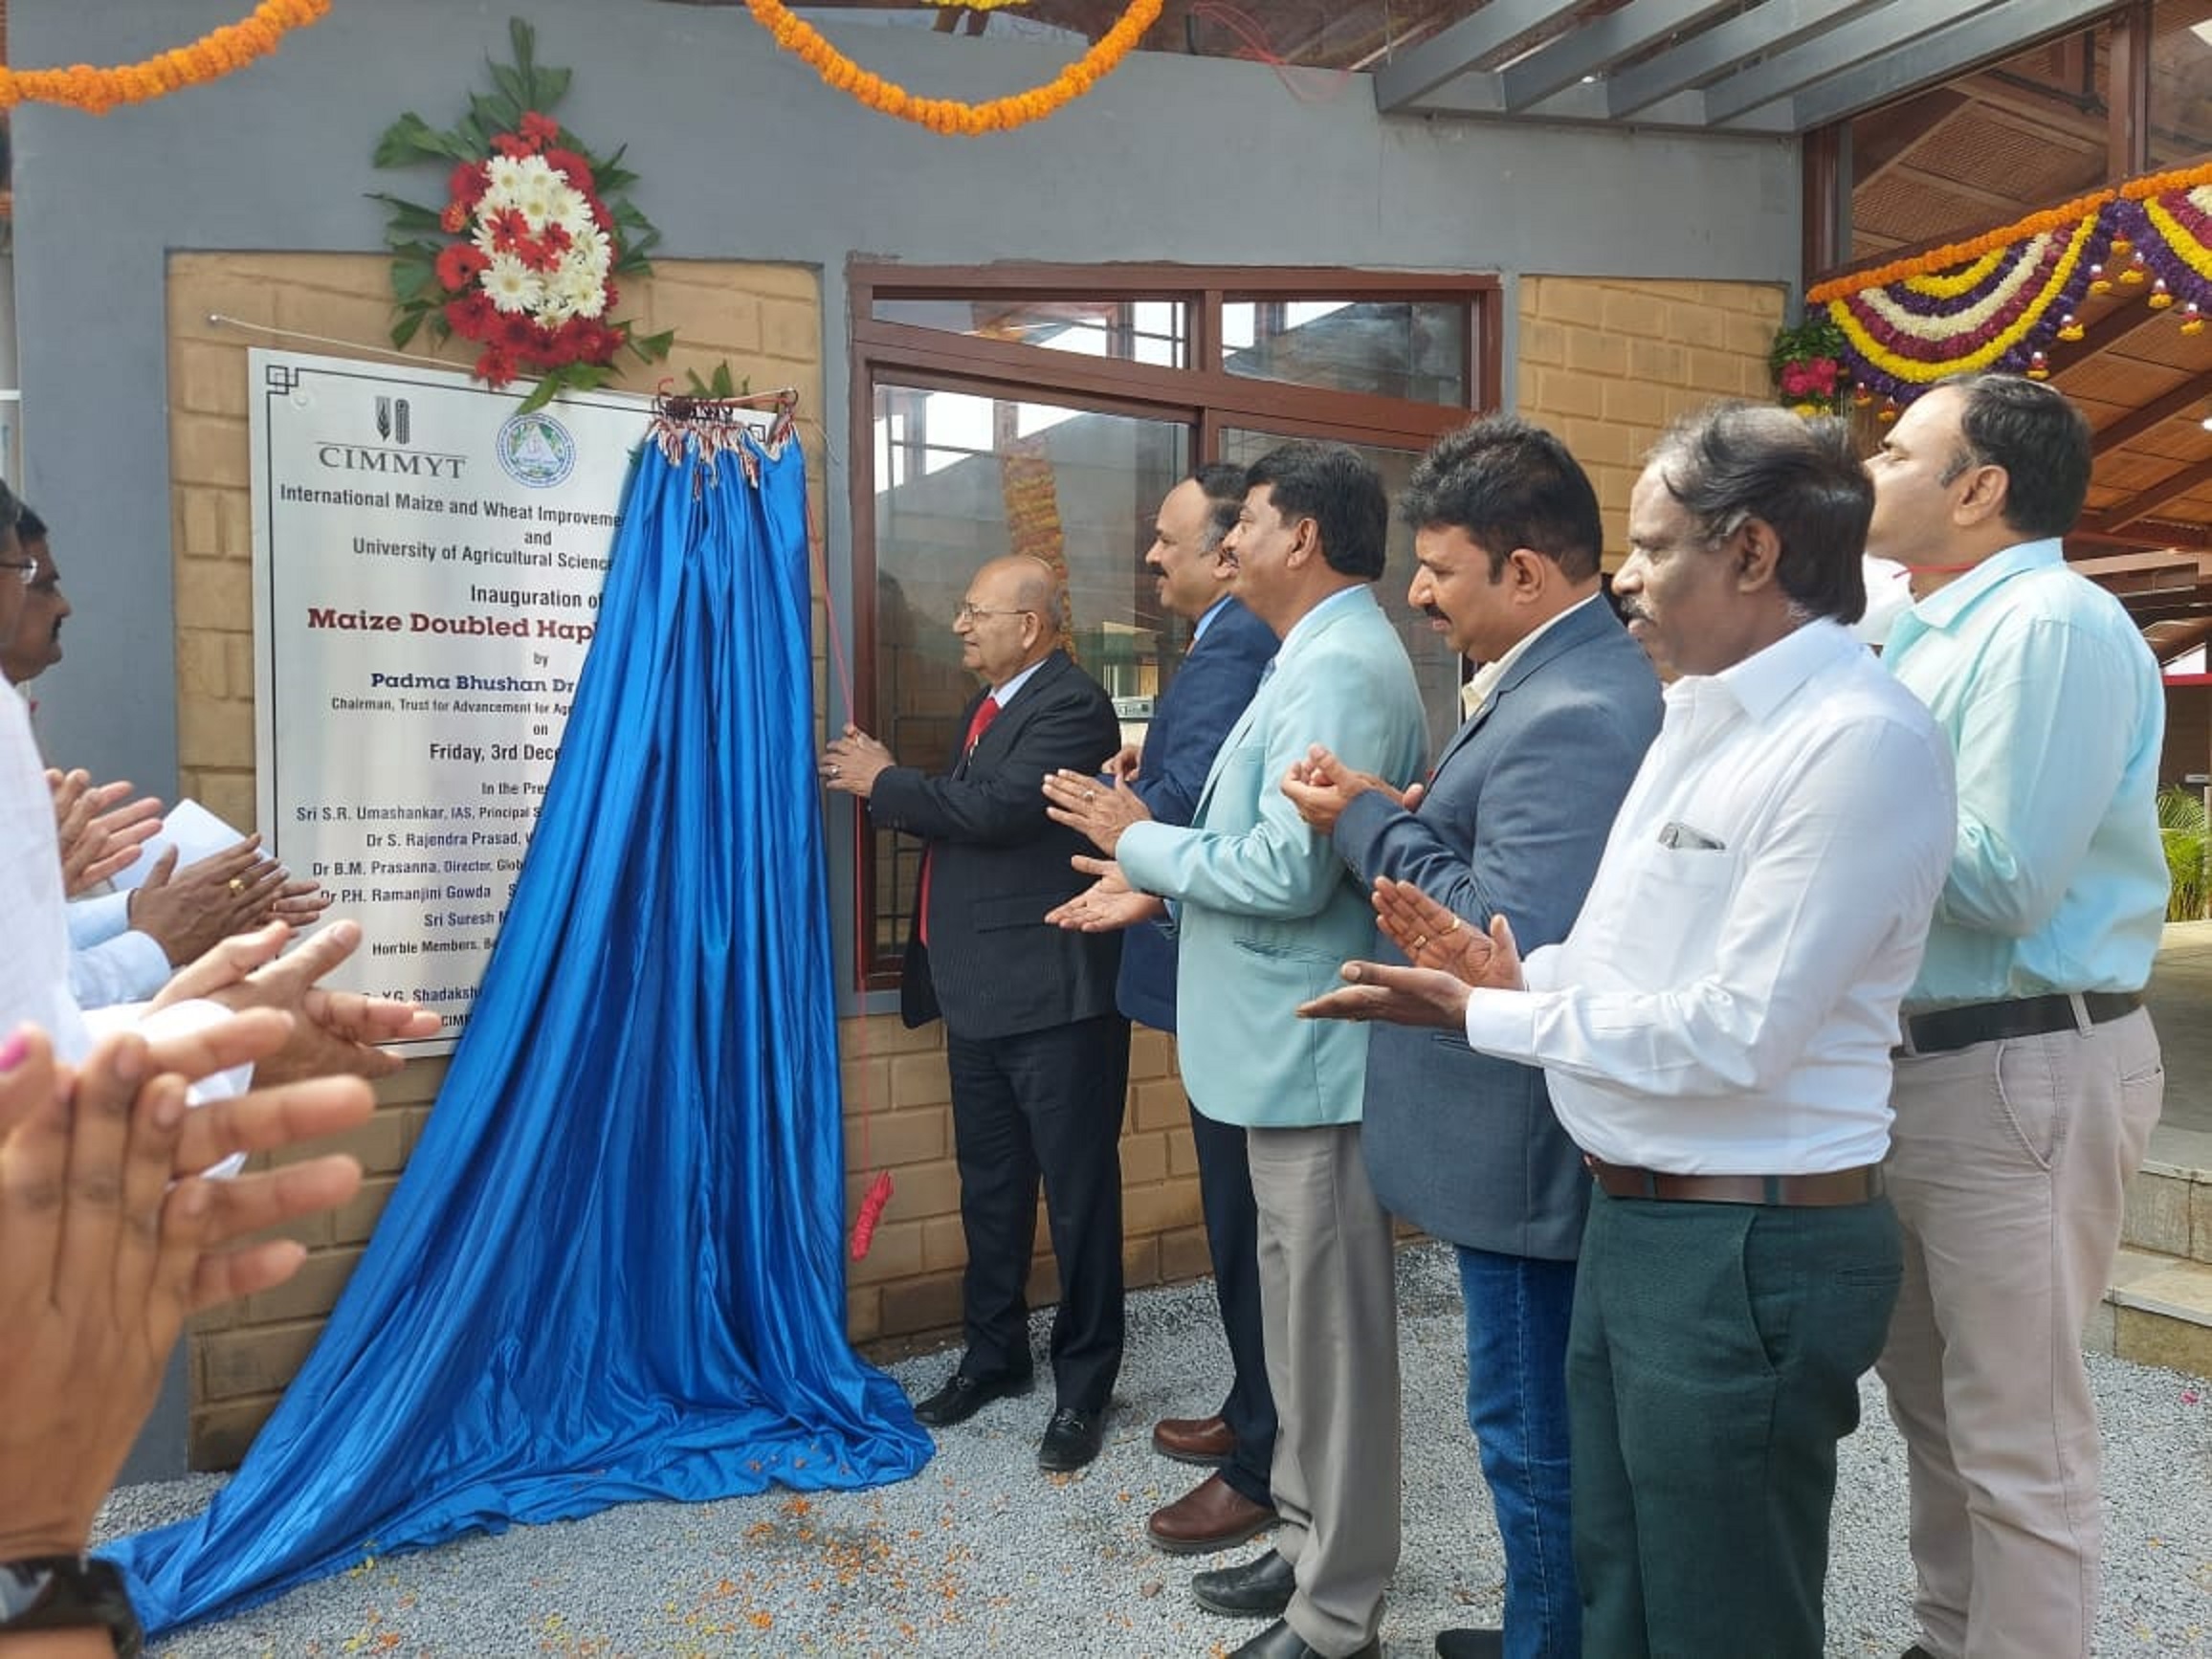 R.S. Paroda, chairman of the Trust for Advancement of Agricultural Sciences (TAAS) in New Delhi, unveils the inauguration plaque for the maize doubled haploid facility in Kunigal, Karnataka state, India. (Photo: CIMMYT)